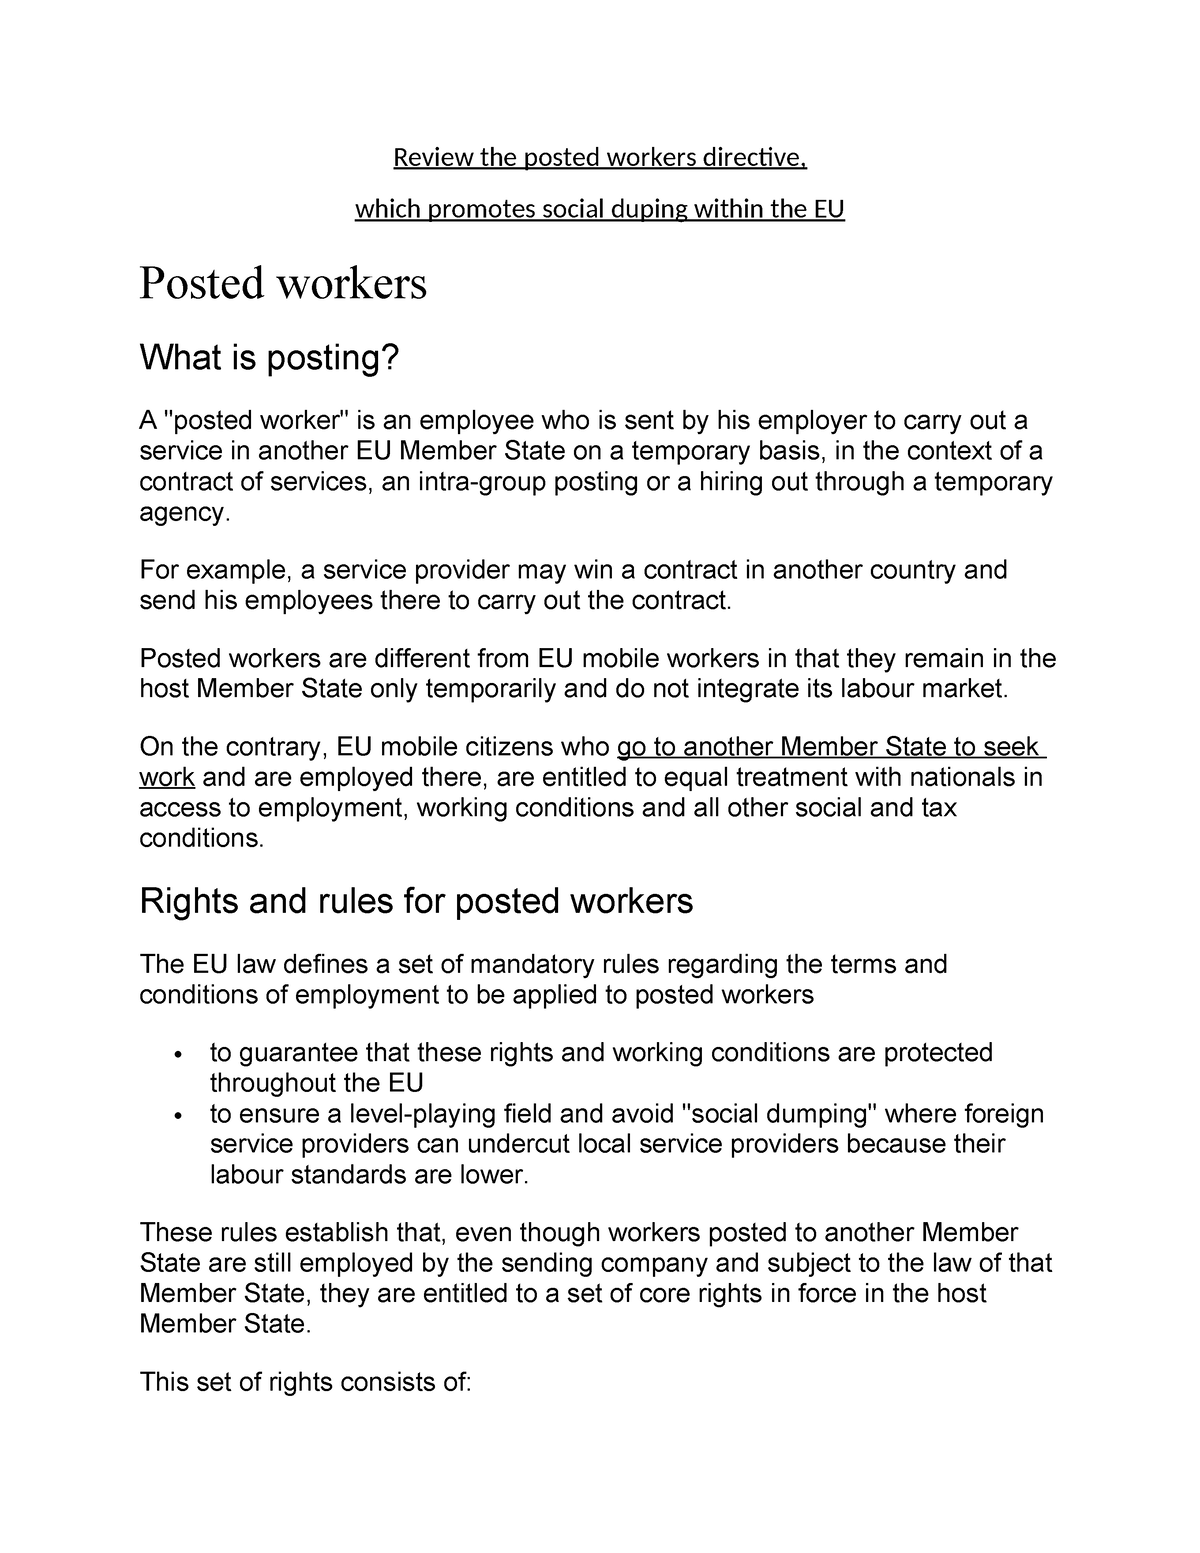 posted workers thesis